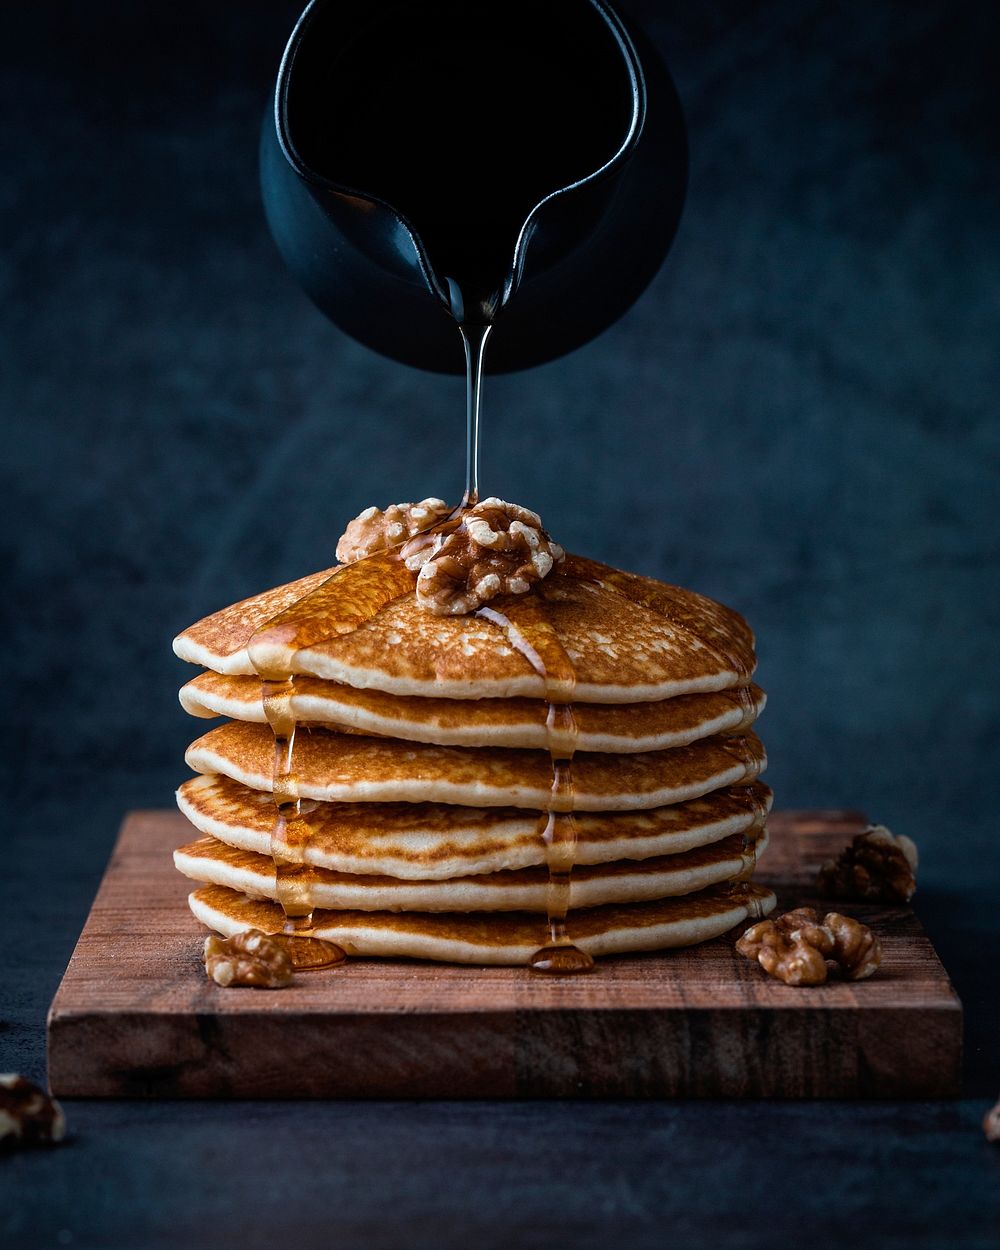 Free pouring honey on pancakes with walnuts image, public domain food CC0 photo.